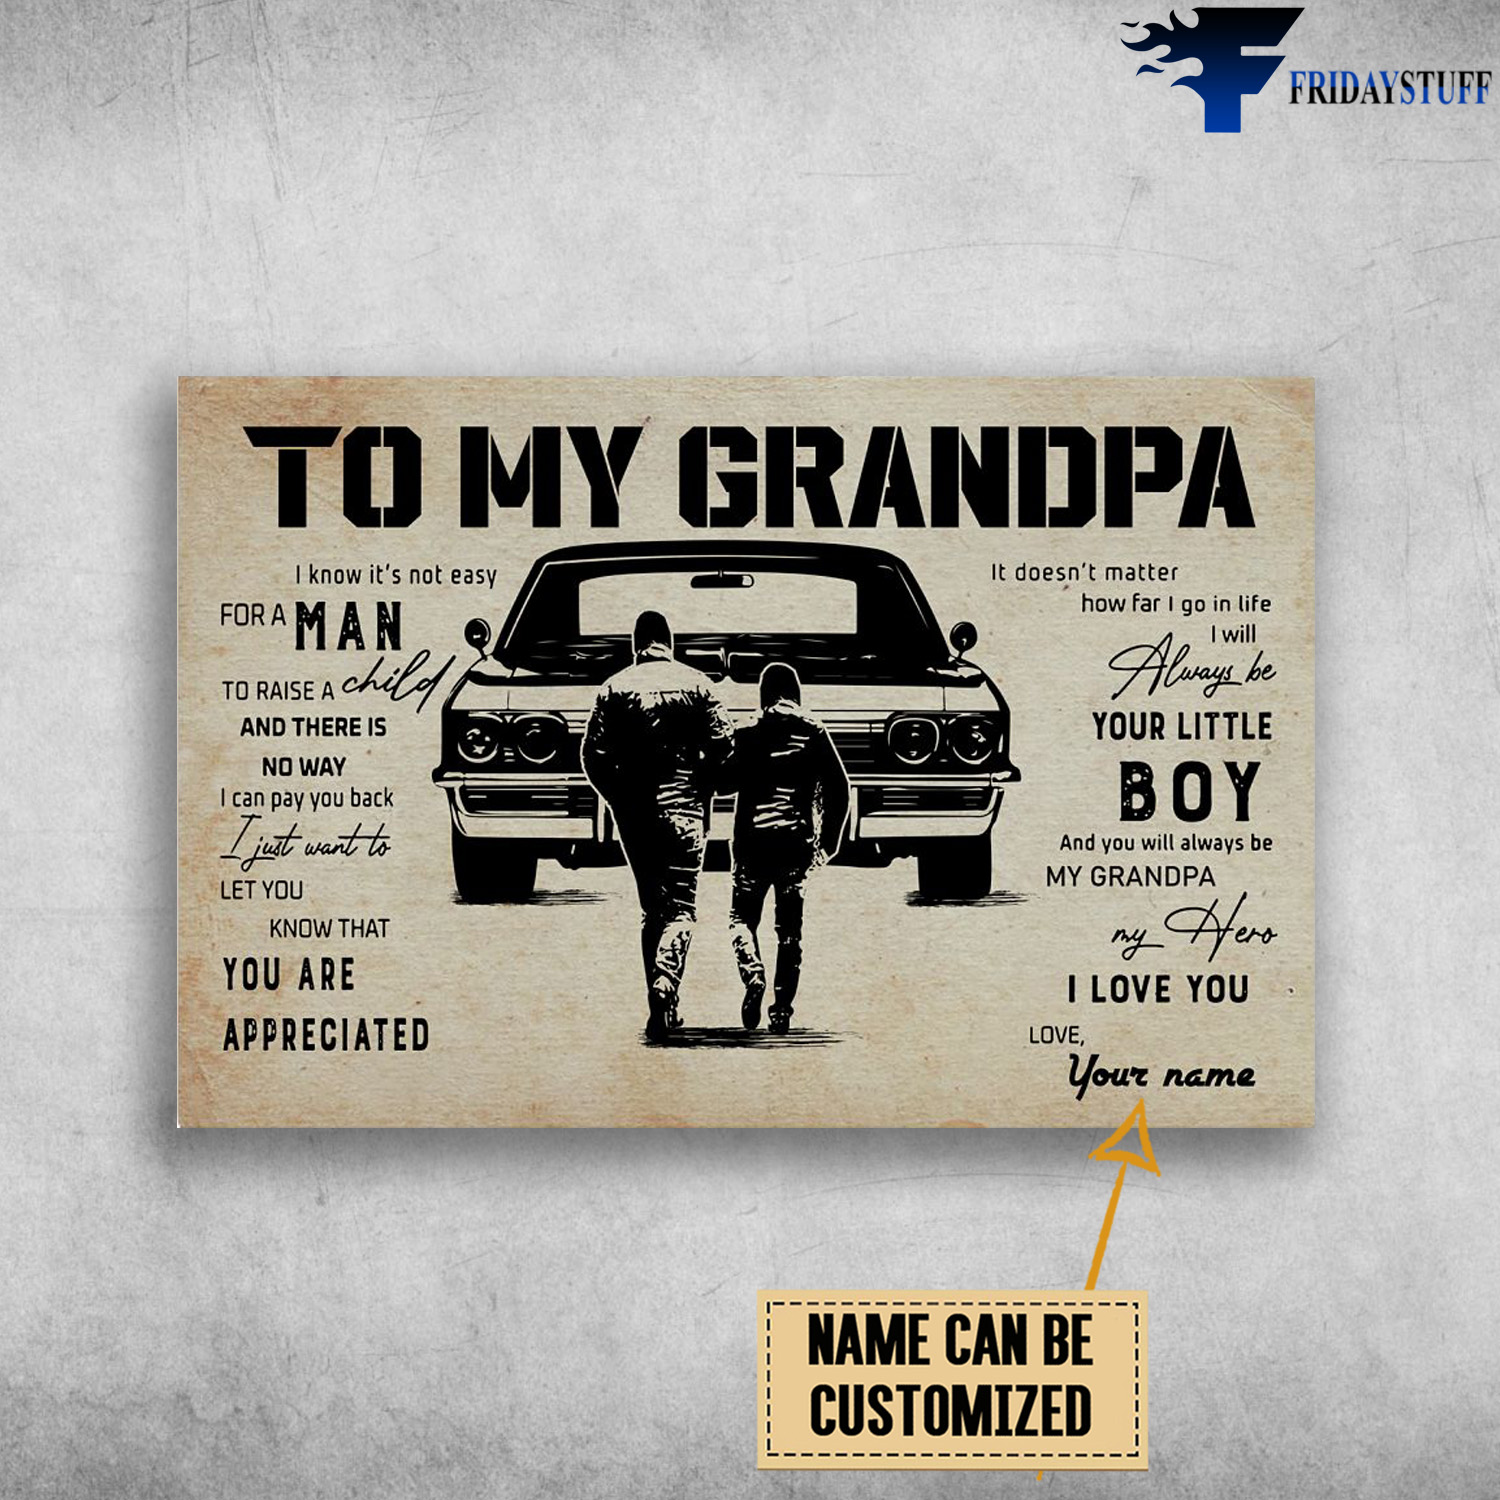 Gift For Granpa, Grandpa Car - To My Grandpa, I Know It’s Not Easy For A Man, To Raise A Child, And There Is No Way, I Can Pay You Back, I Just Want To Let You Know That, You Are Appreciated, I Doesn’t Matter How Far I Go In Life